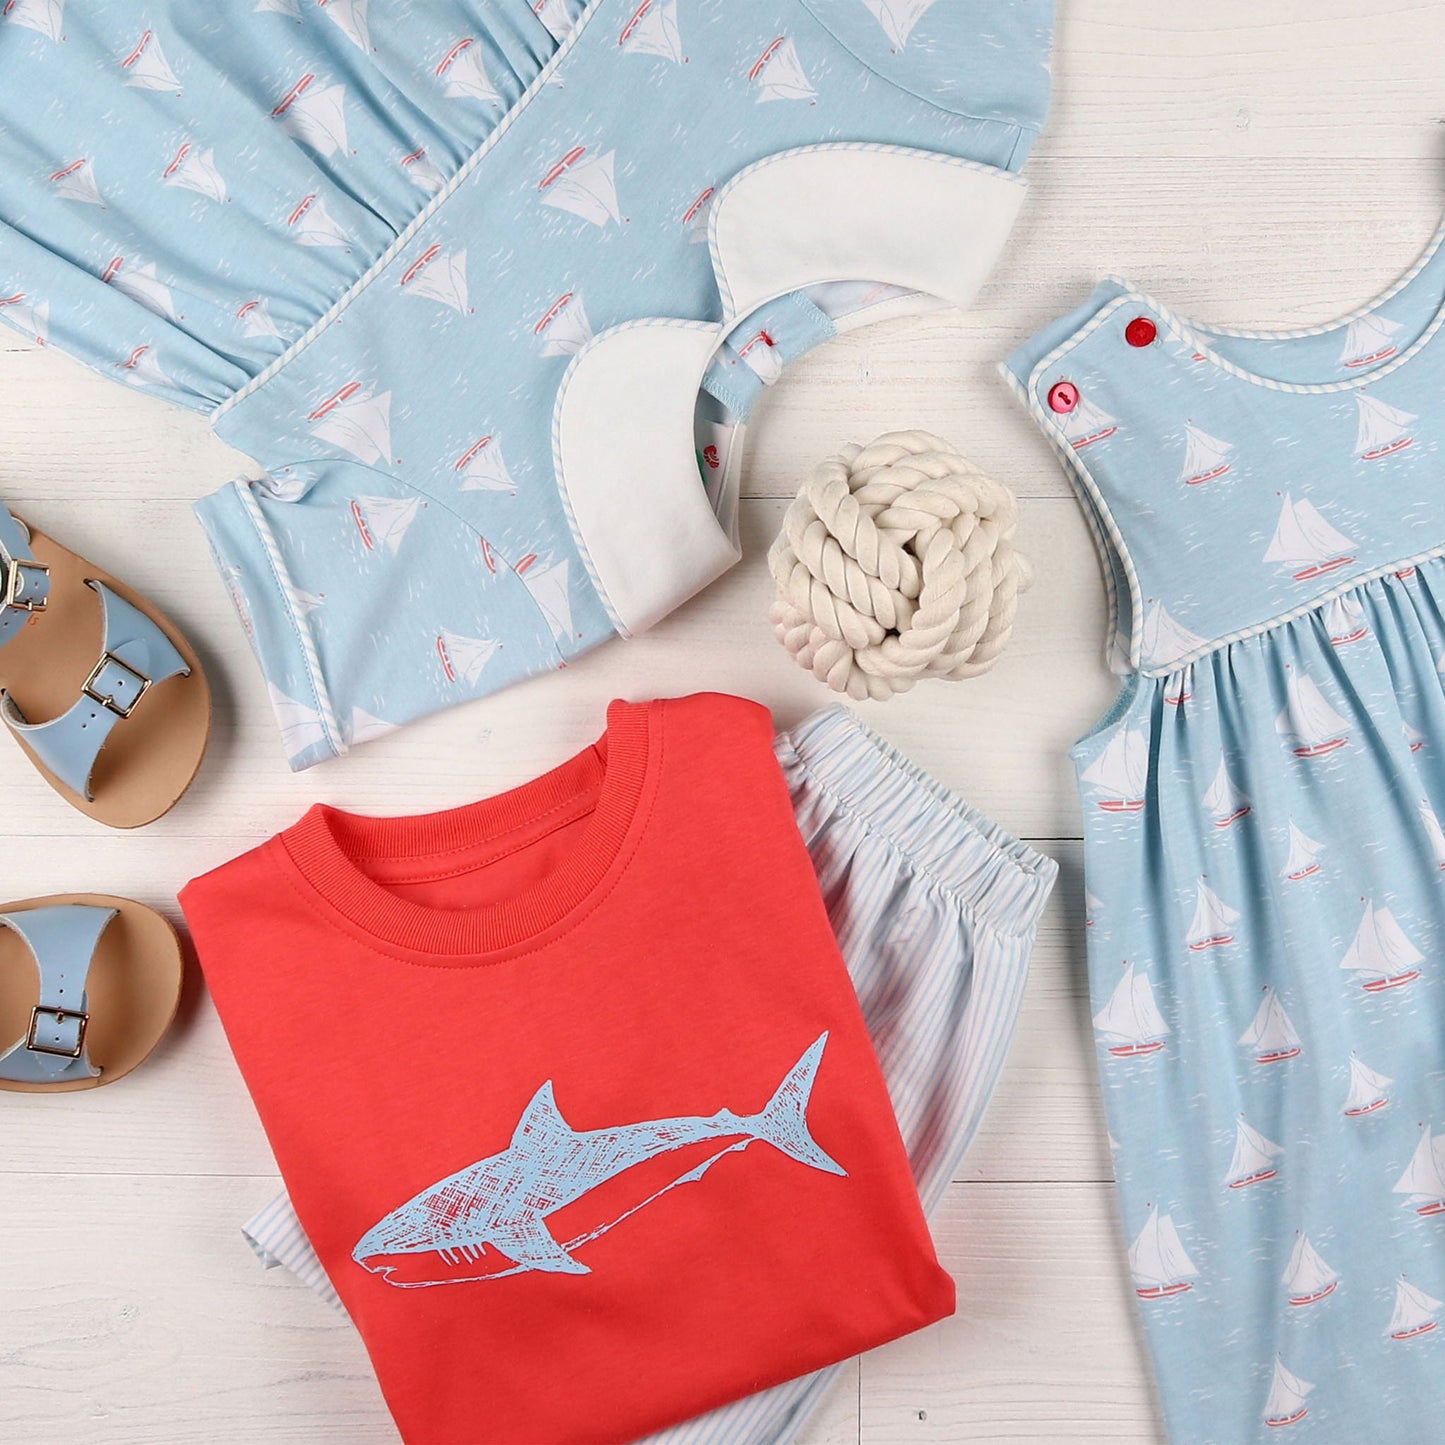 flatlay of Great White Graphic Tee, sailboat dress and light blue sandals